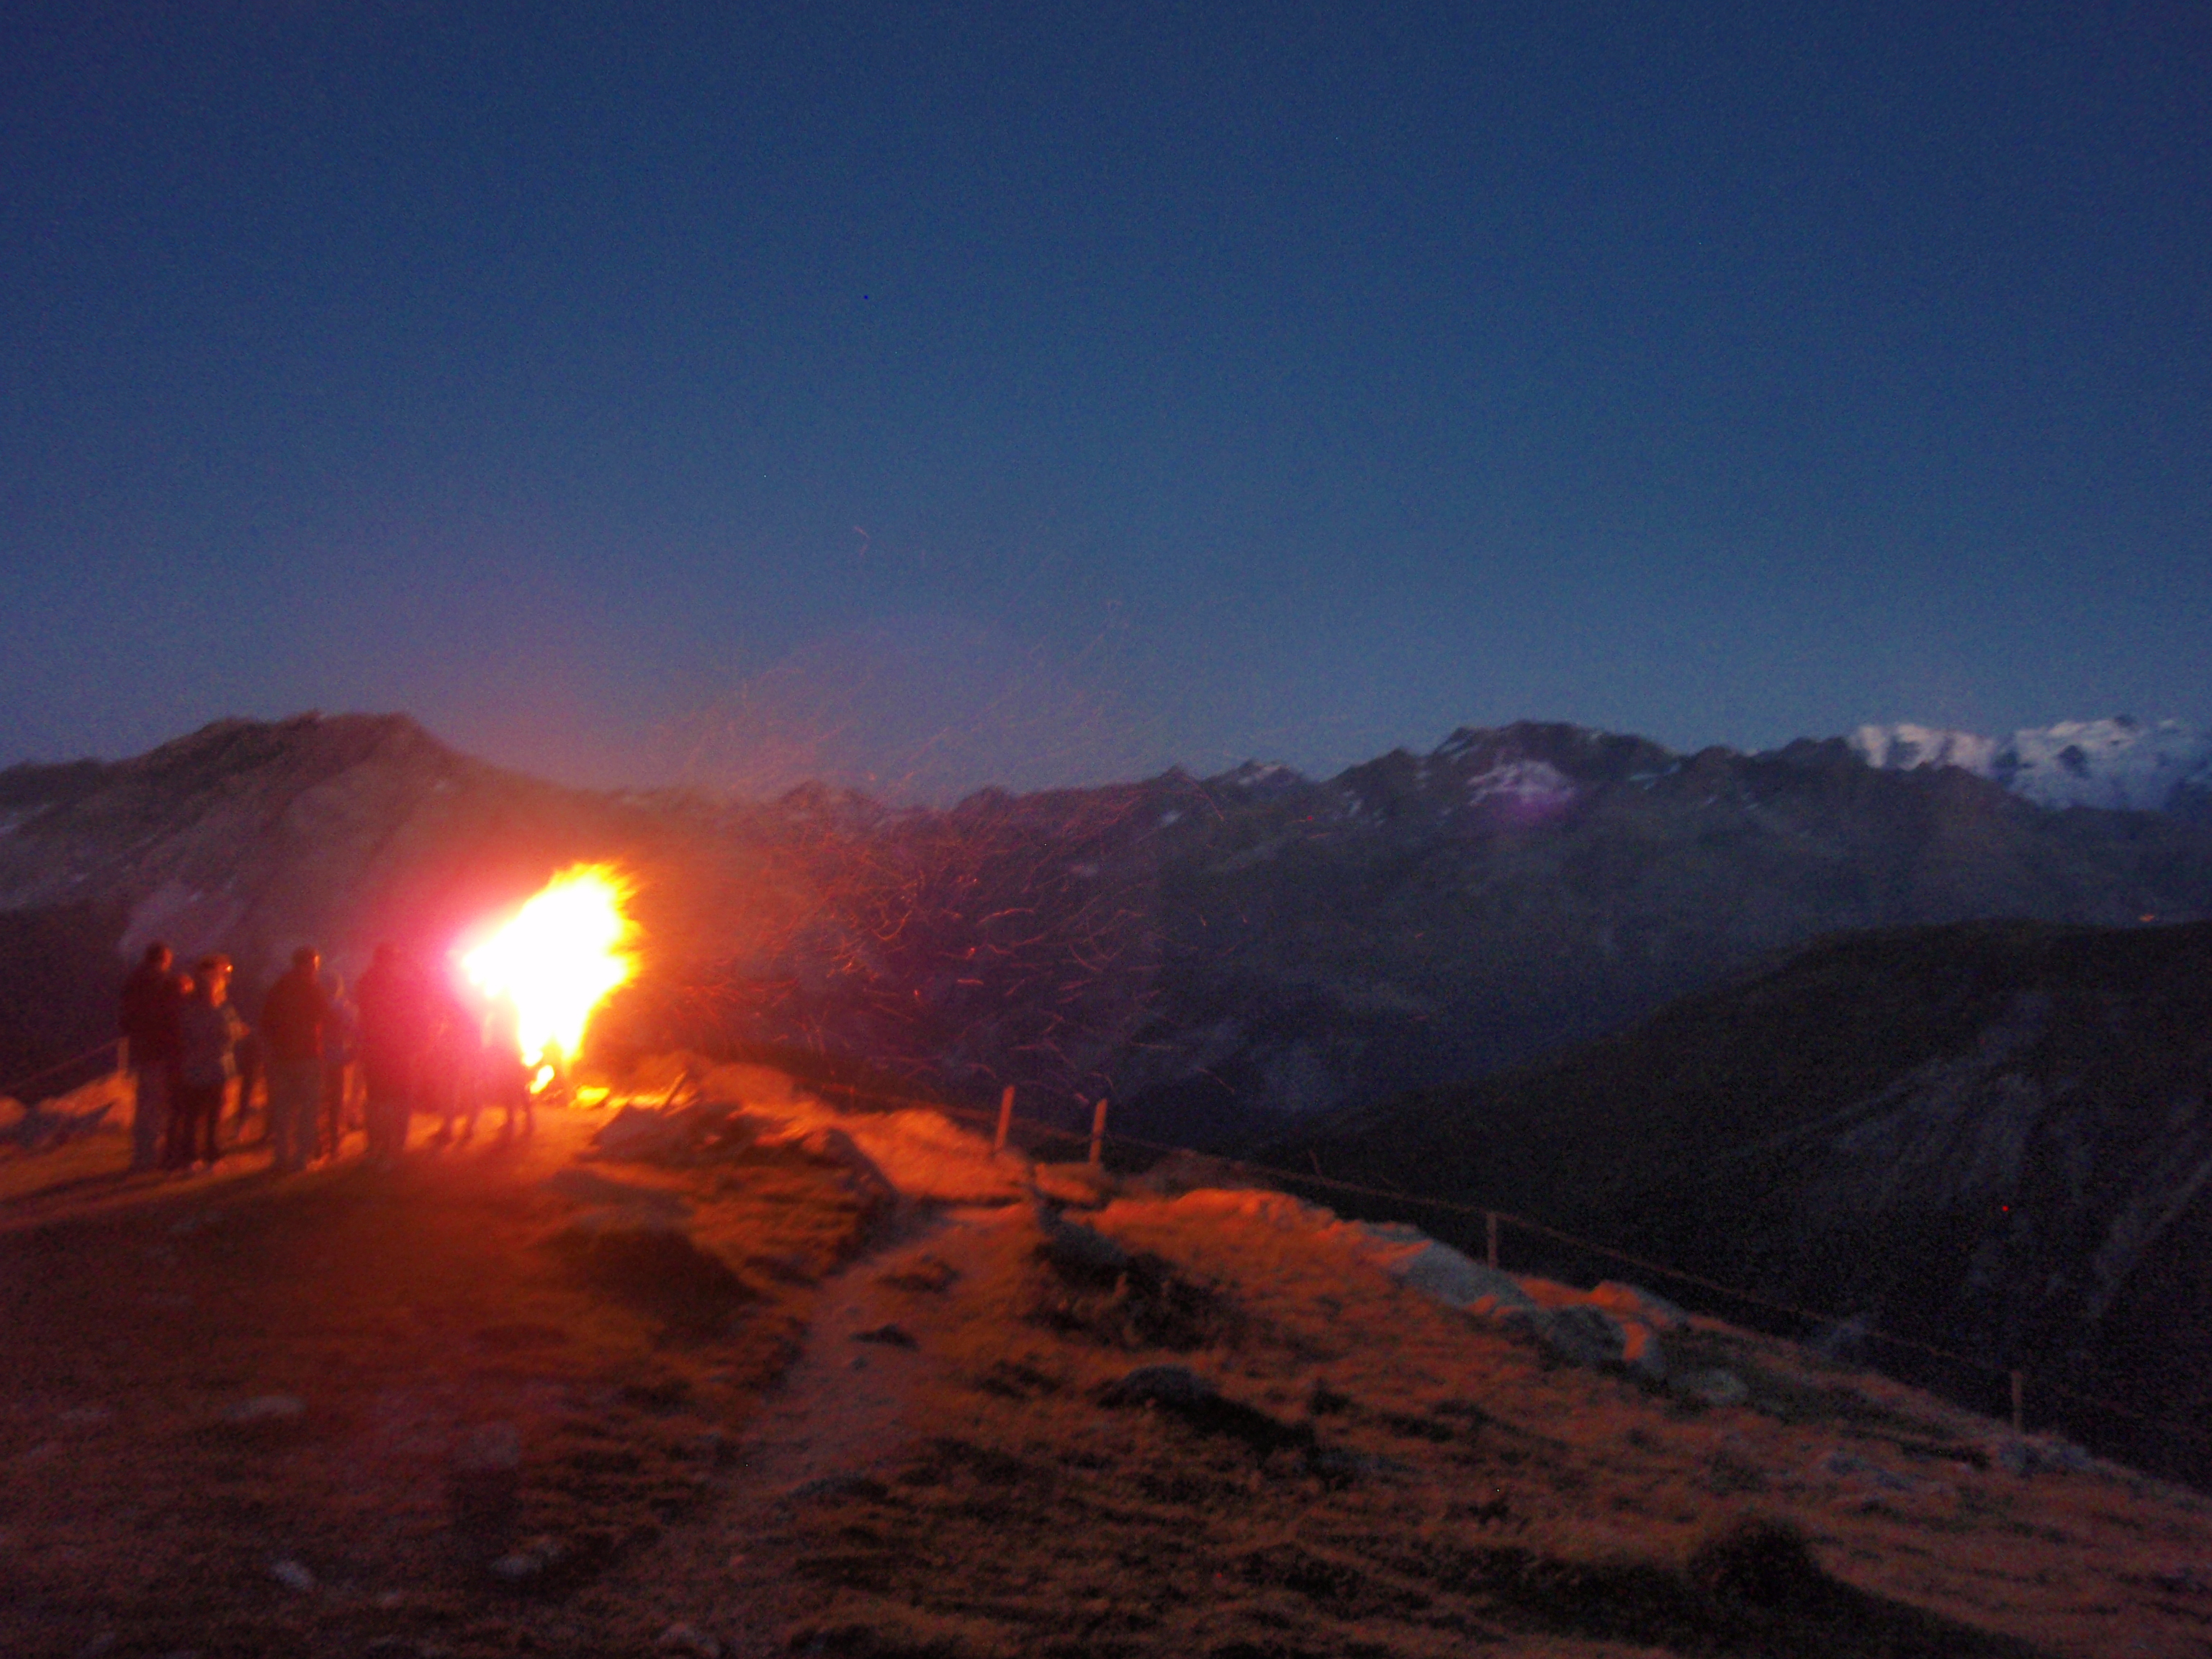 A beacon fire in the Alps